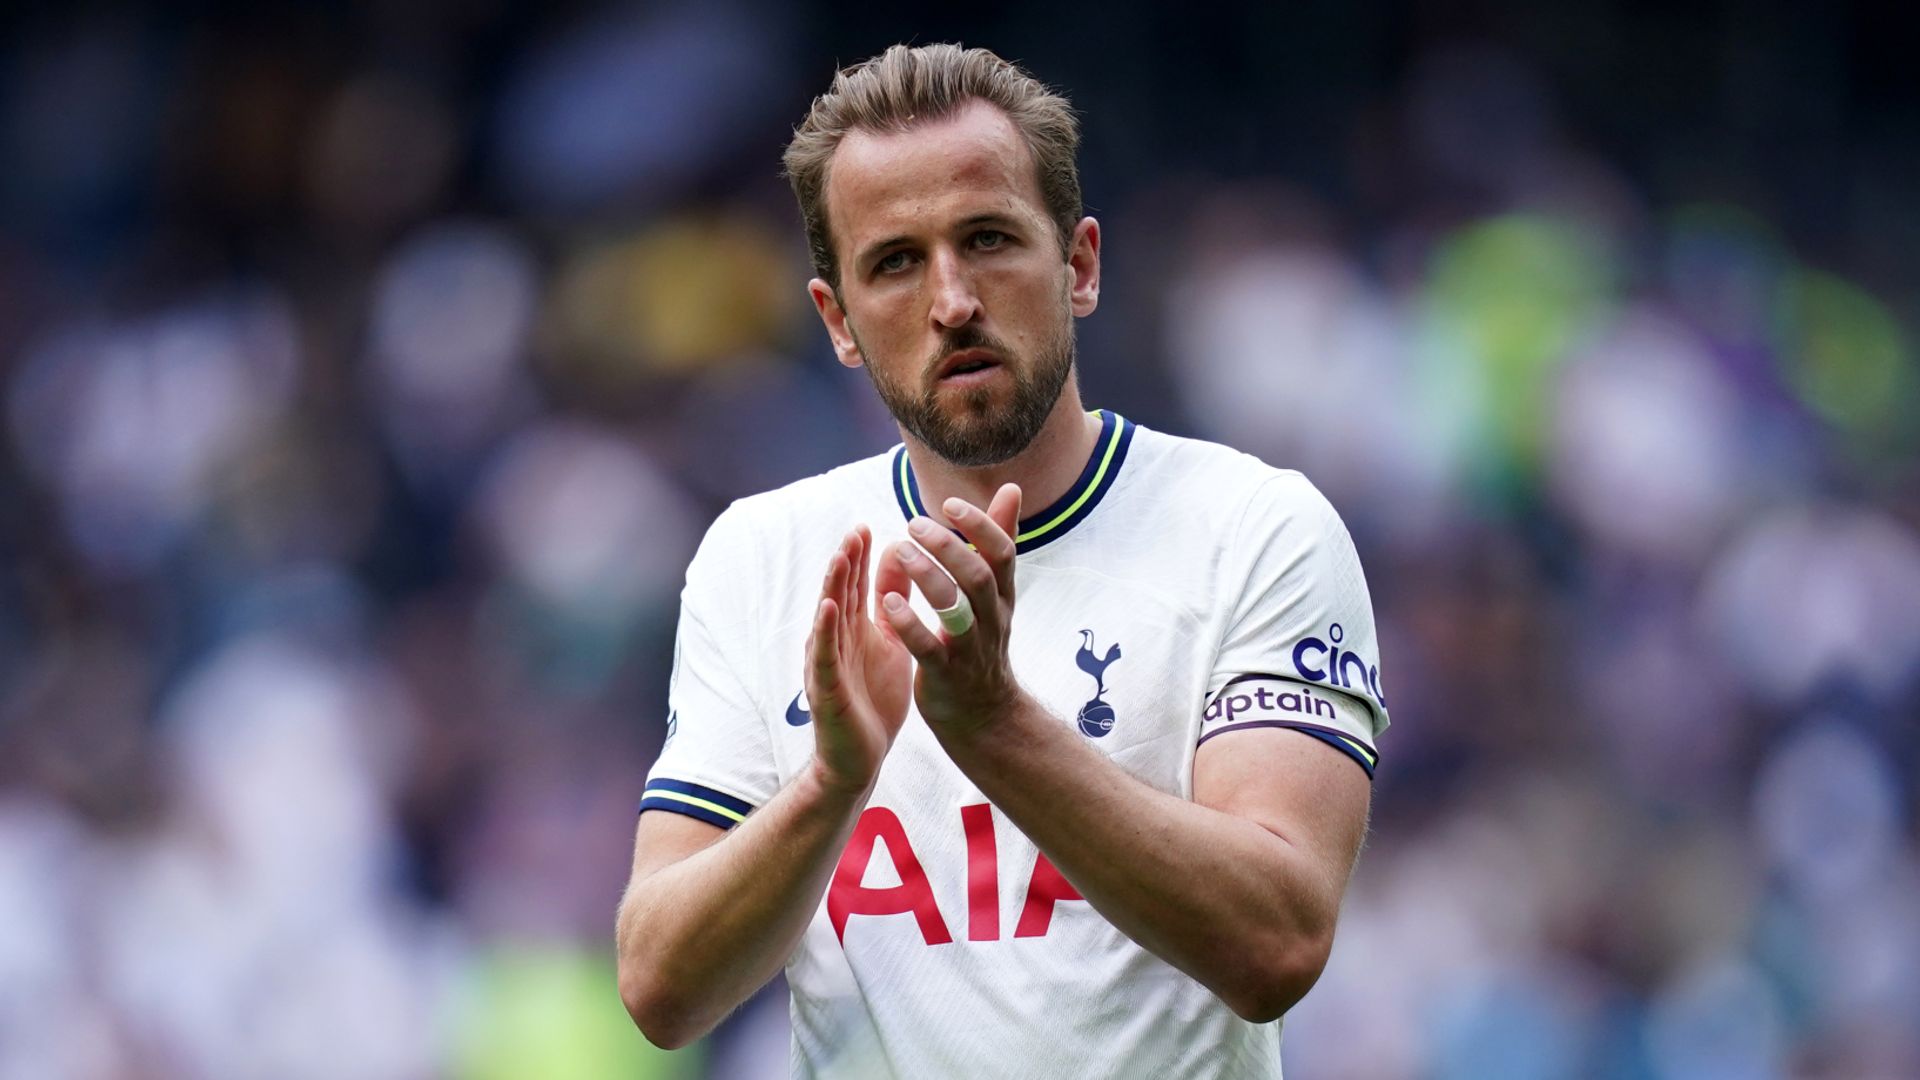 Kane latest: Could striker stay at Tottenham?